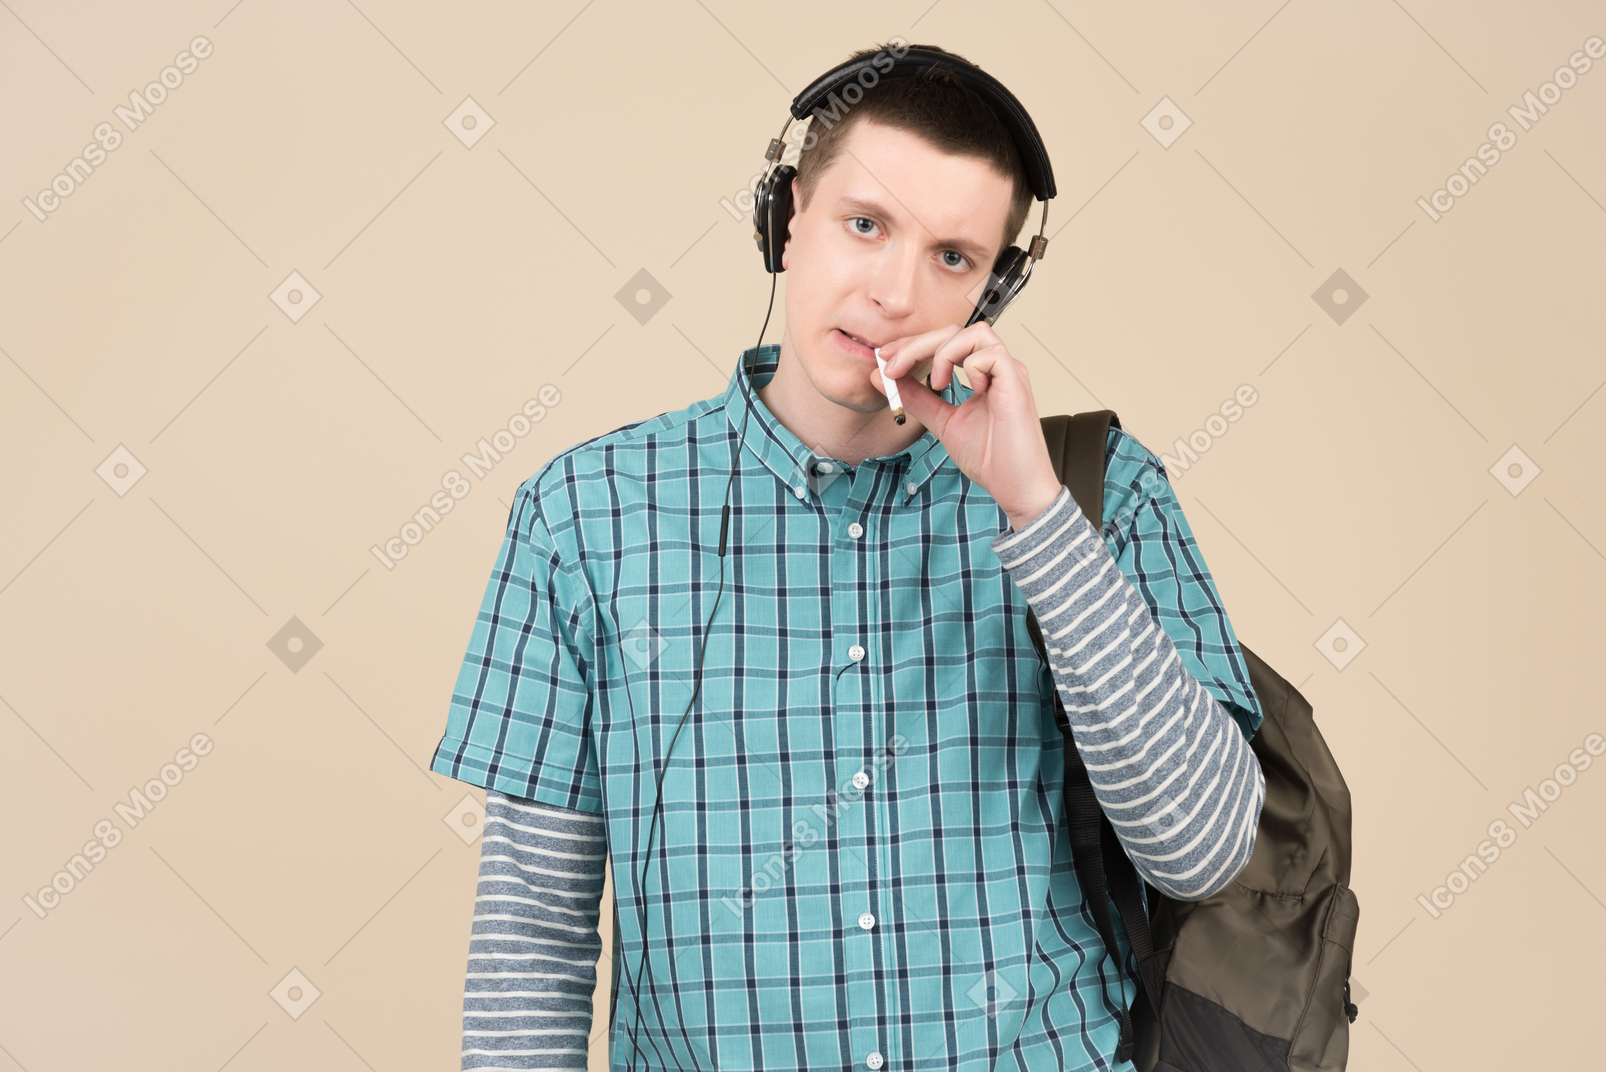 Young man smoking a cigarette and listening to music